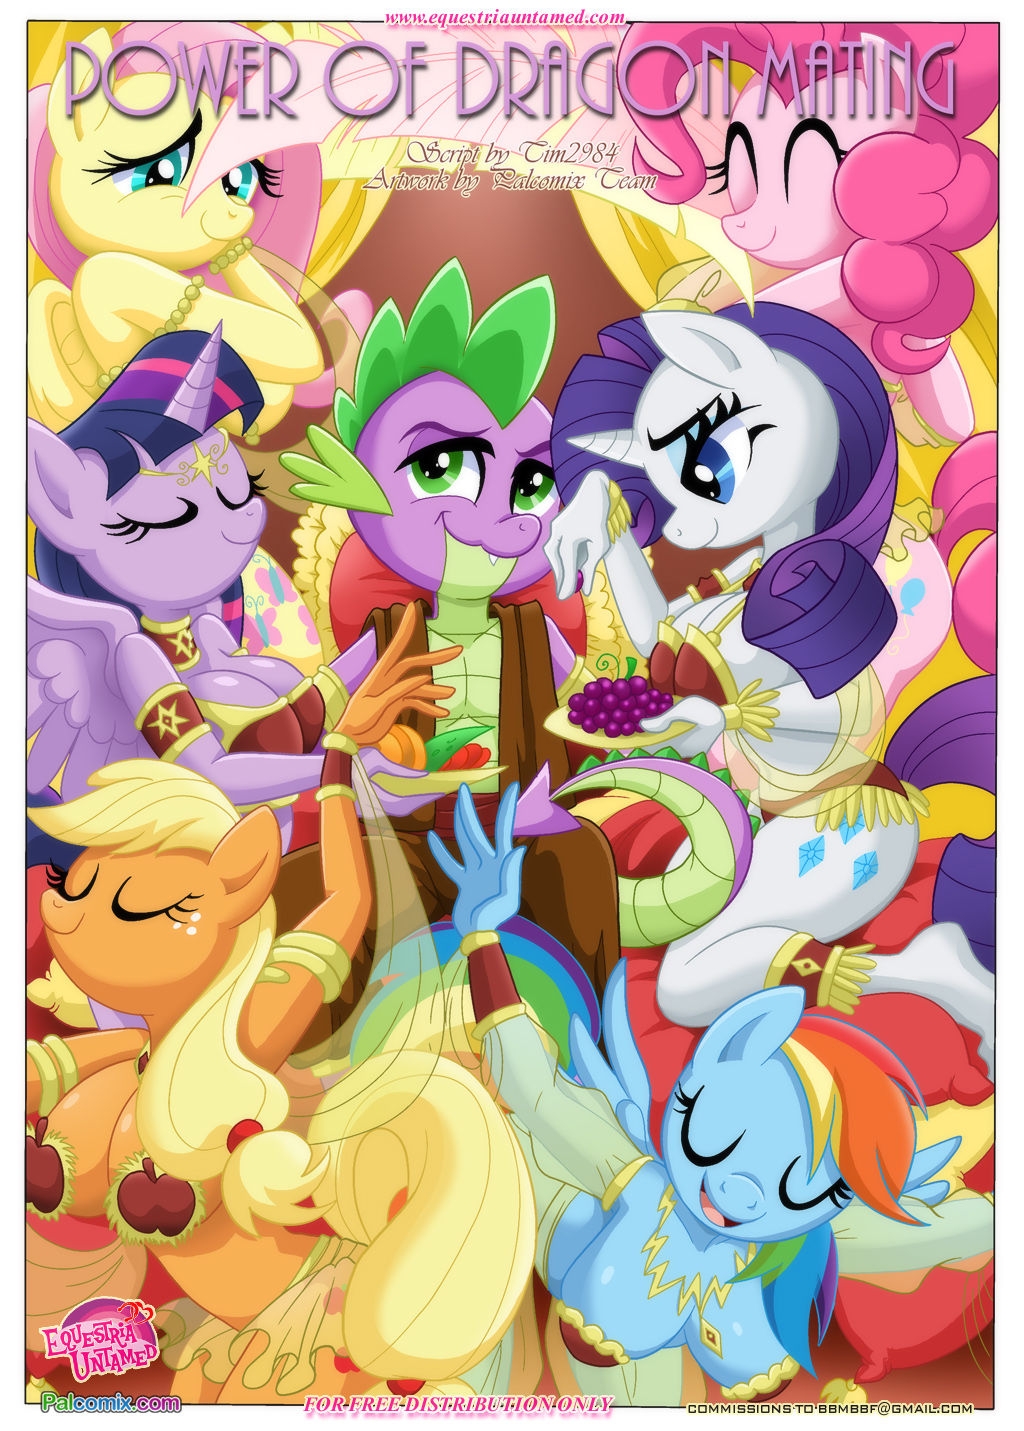 [Palcomix] The Power Of Dragon Mating (My Little Pony Friendship Is Magic) [French] [Melotan] 0